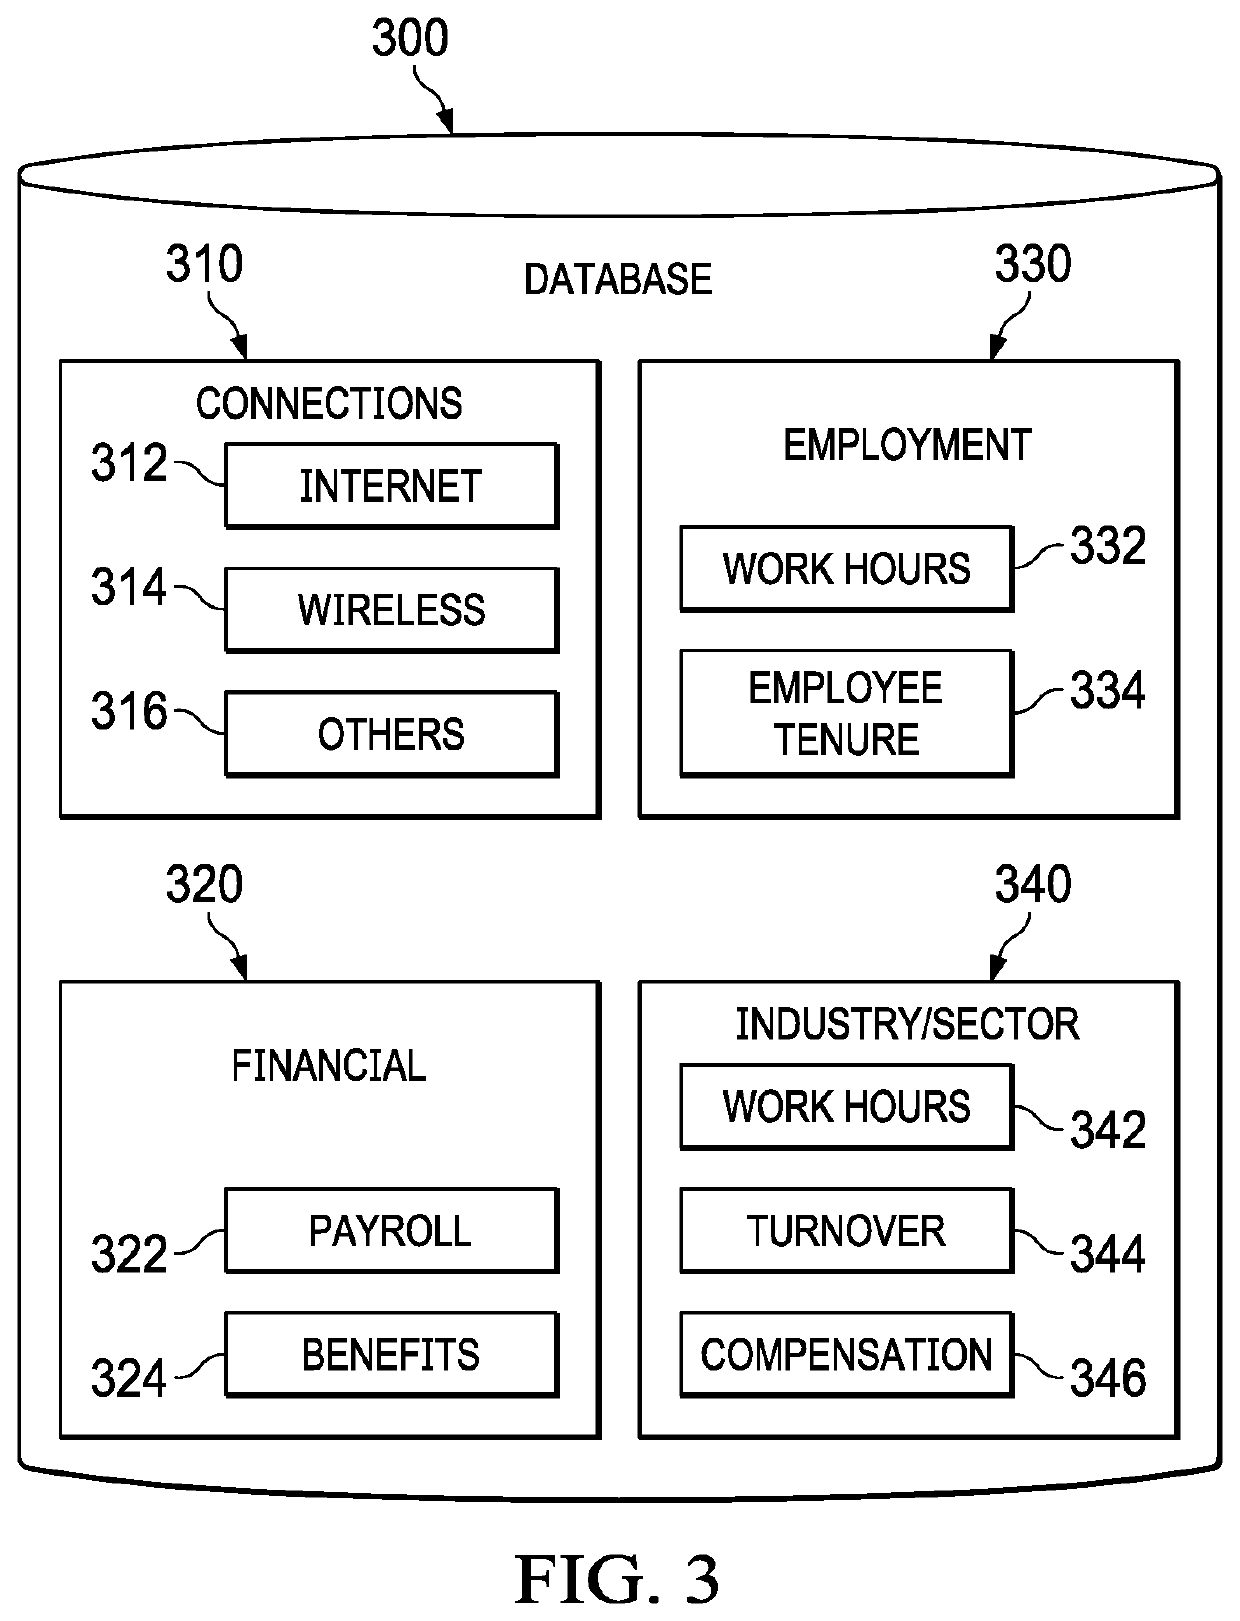 Method and System for Predictive Modeling for Dynamically Scheduling Resource Allocation